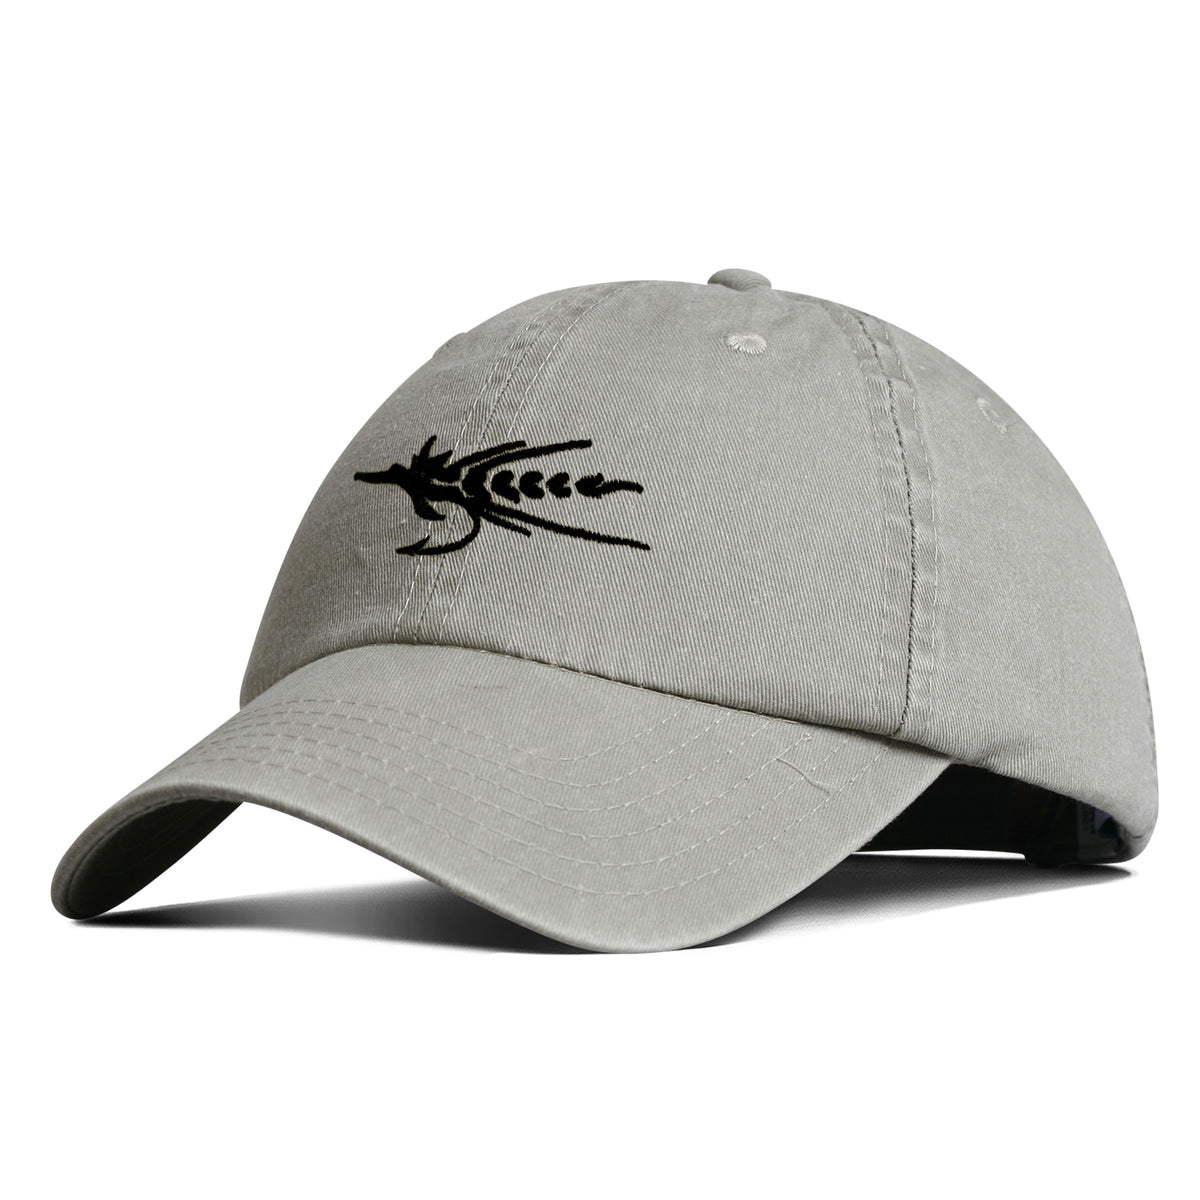 Black Fly Embroidered Hat Khaki